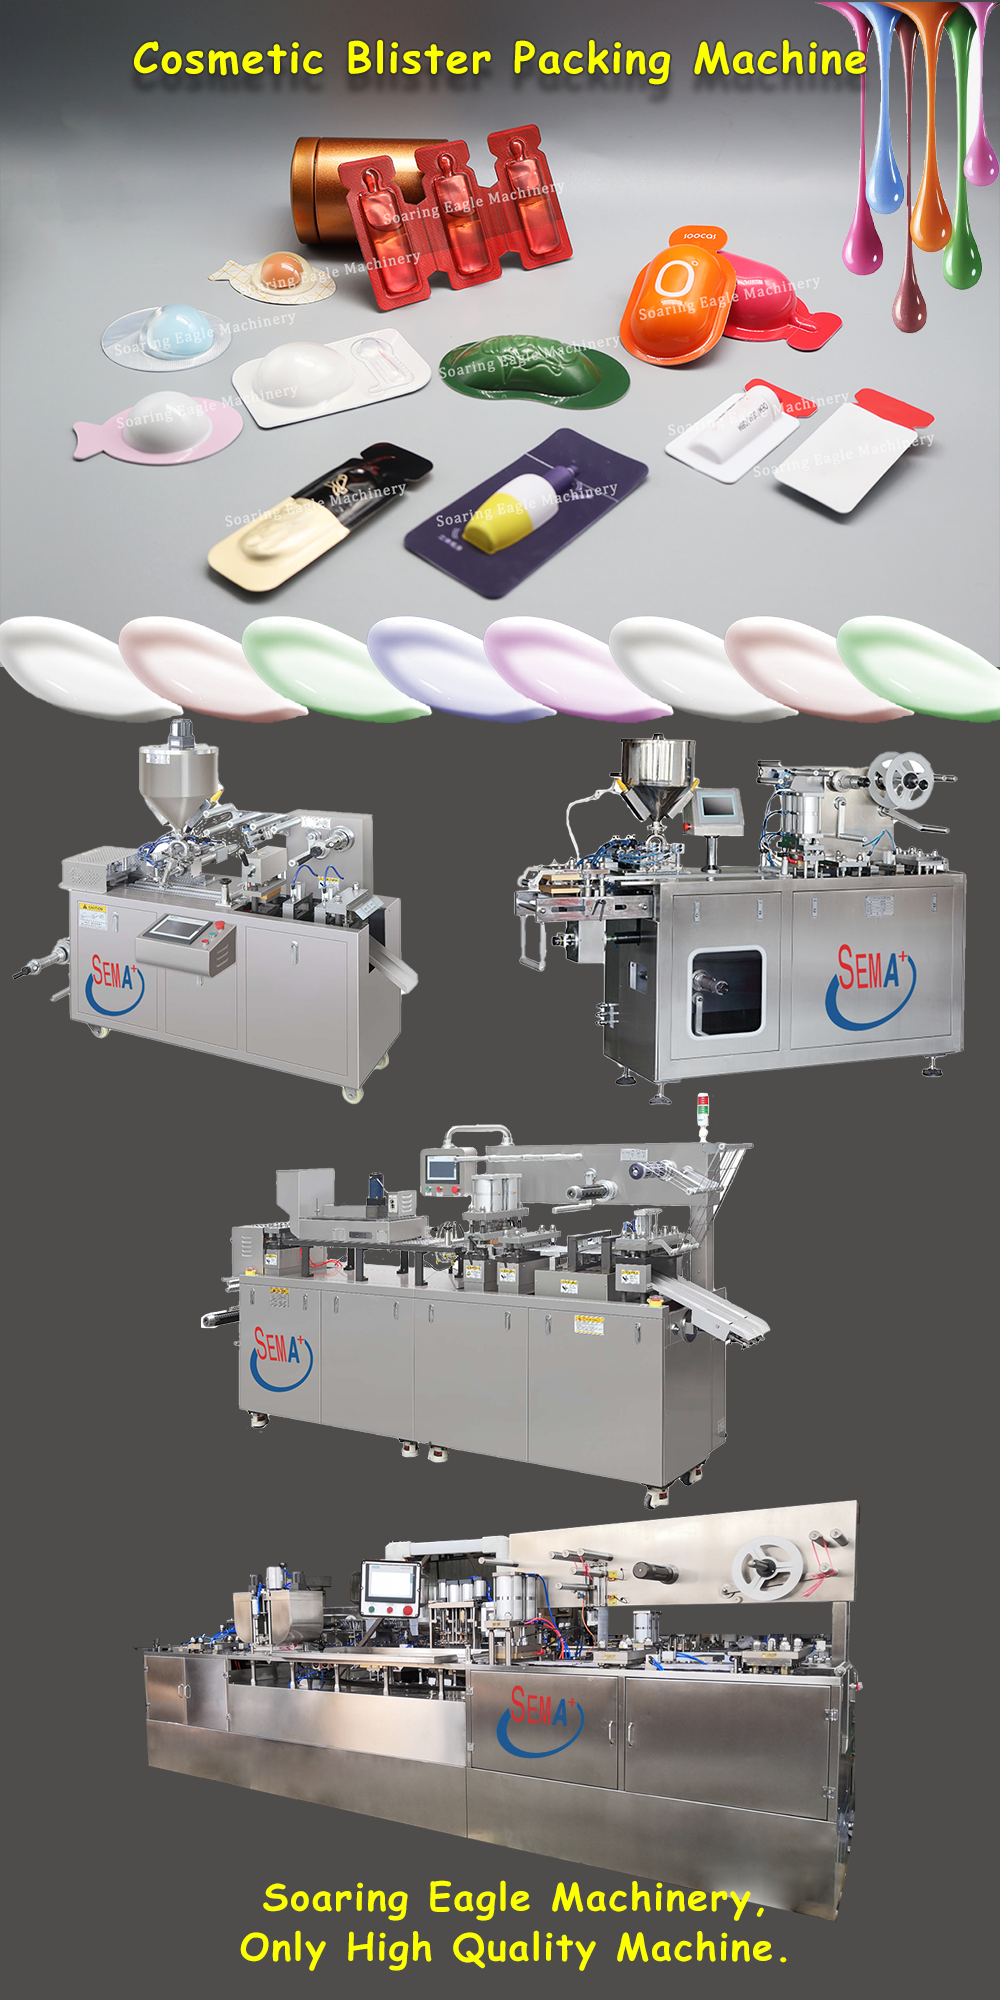 Cosmetic blister packing machine